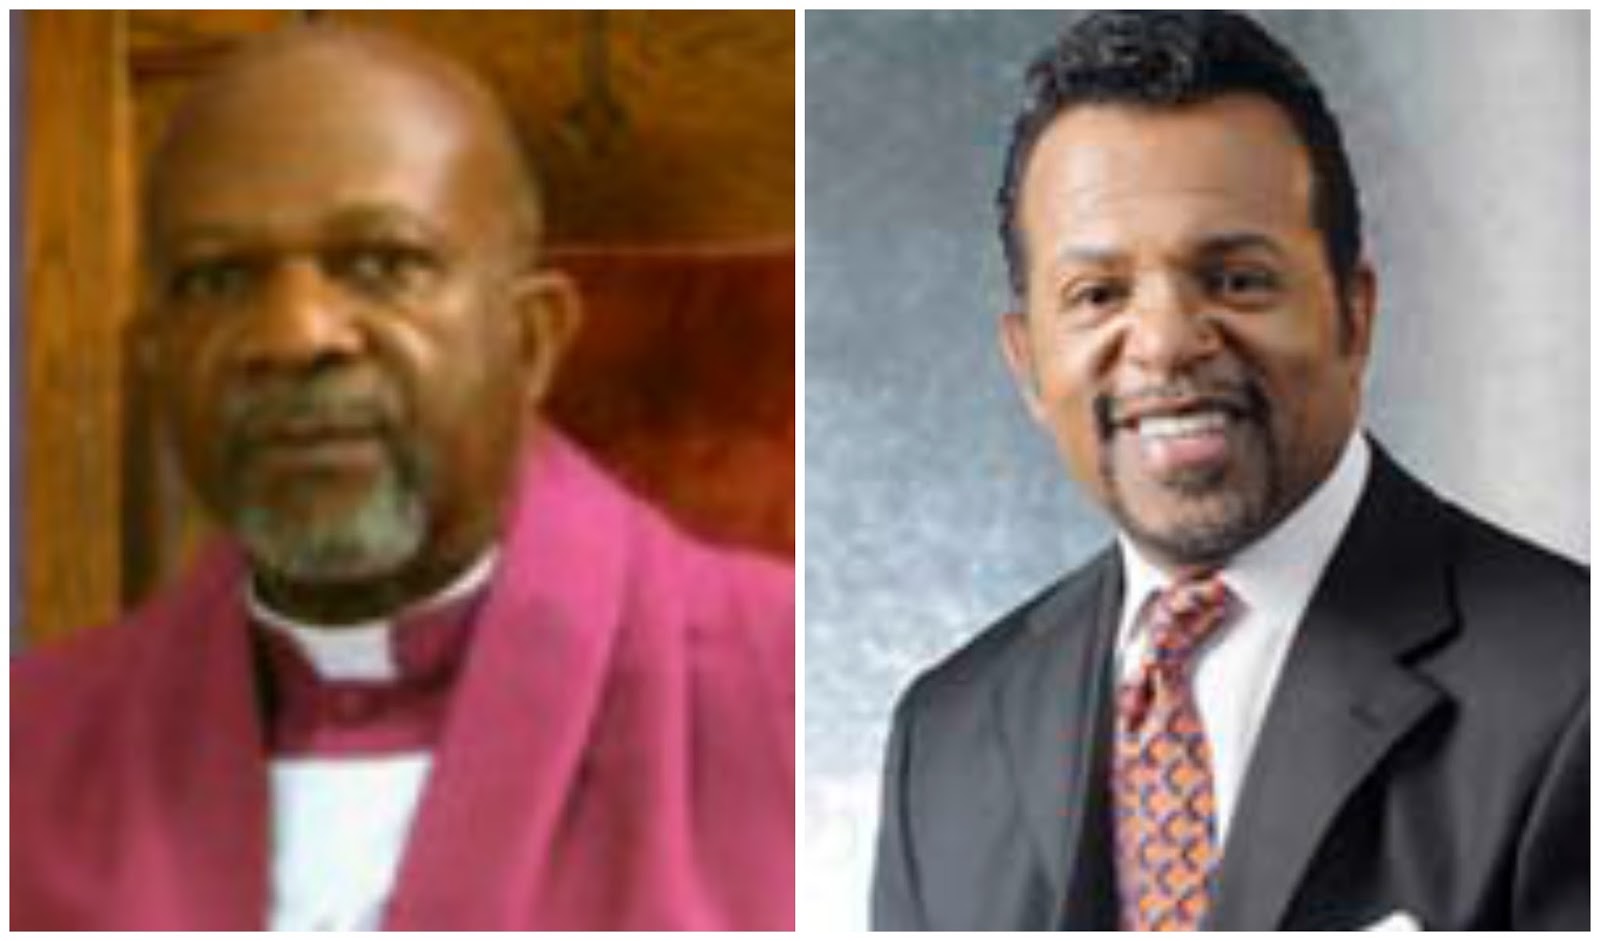 Should Bishop Carlton Pearson And His Message The Gospel Of In